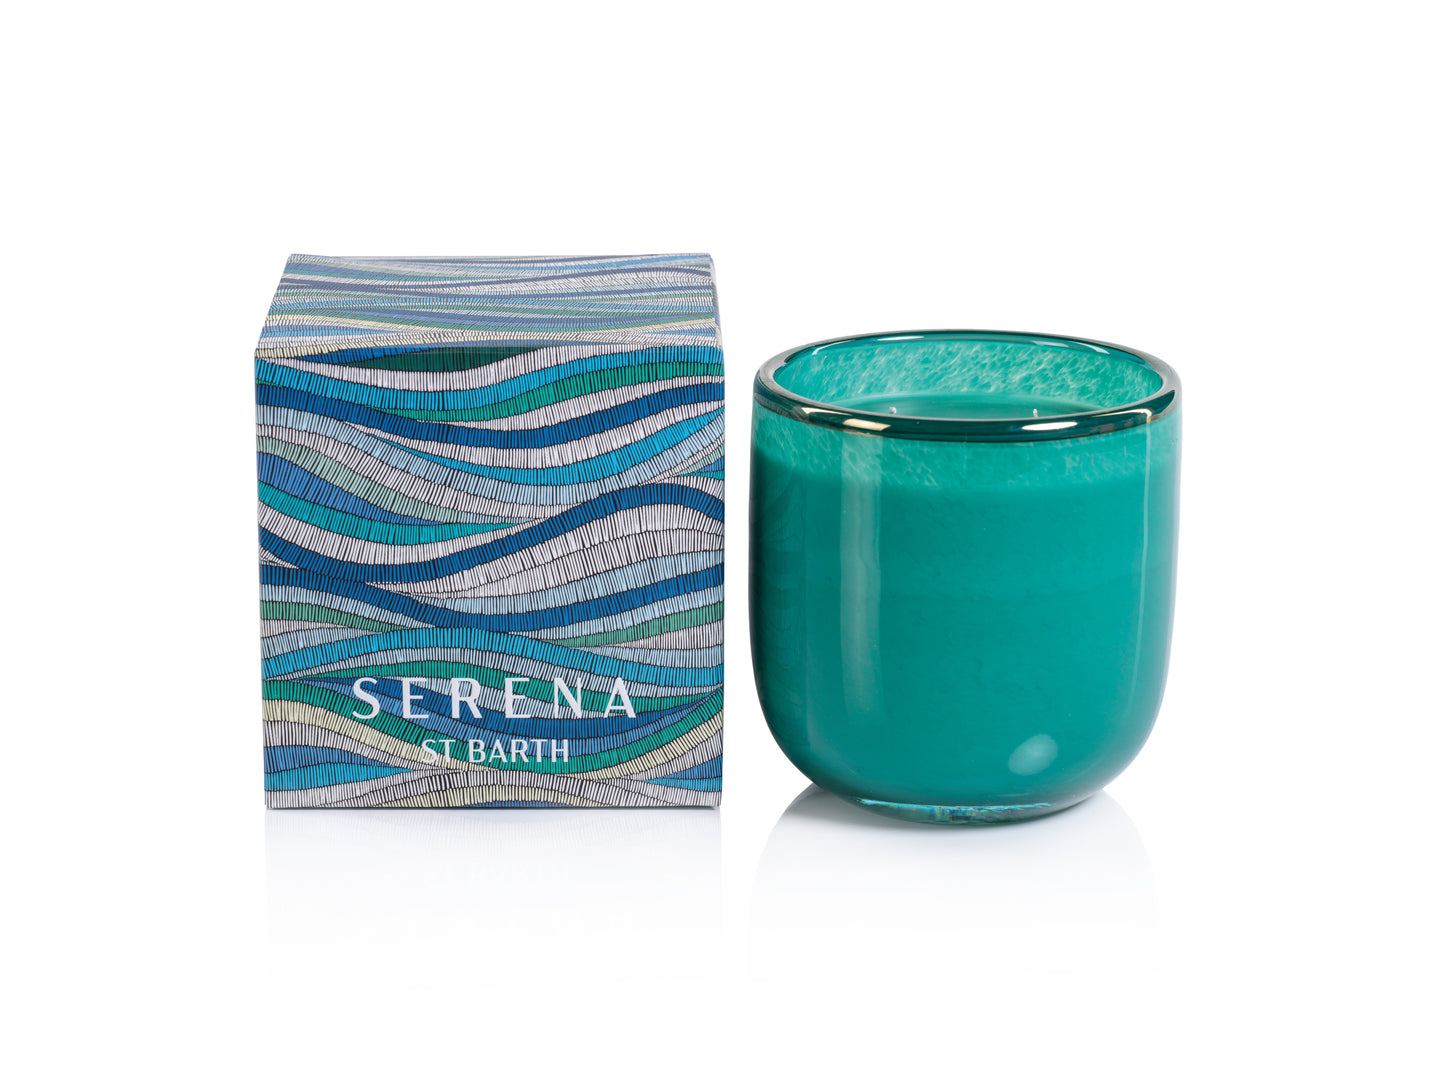 LEMON THYME Zodax Serena Saint Barth Scented Jar Candle 14.5 oz - Gift Boxed